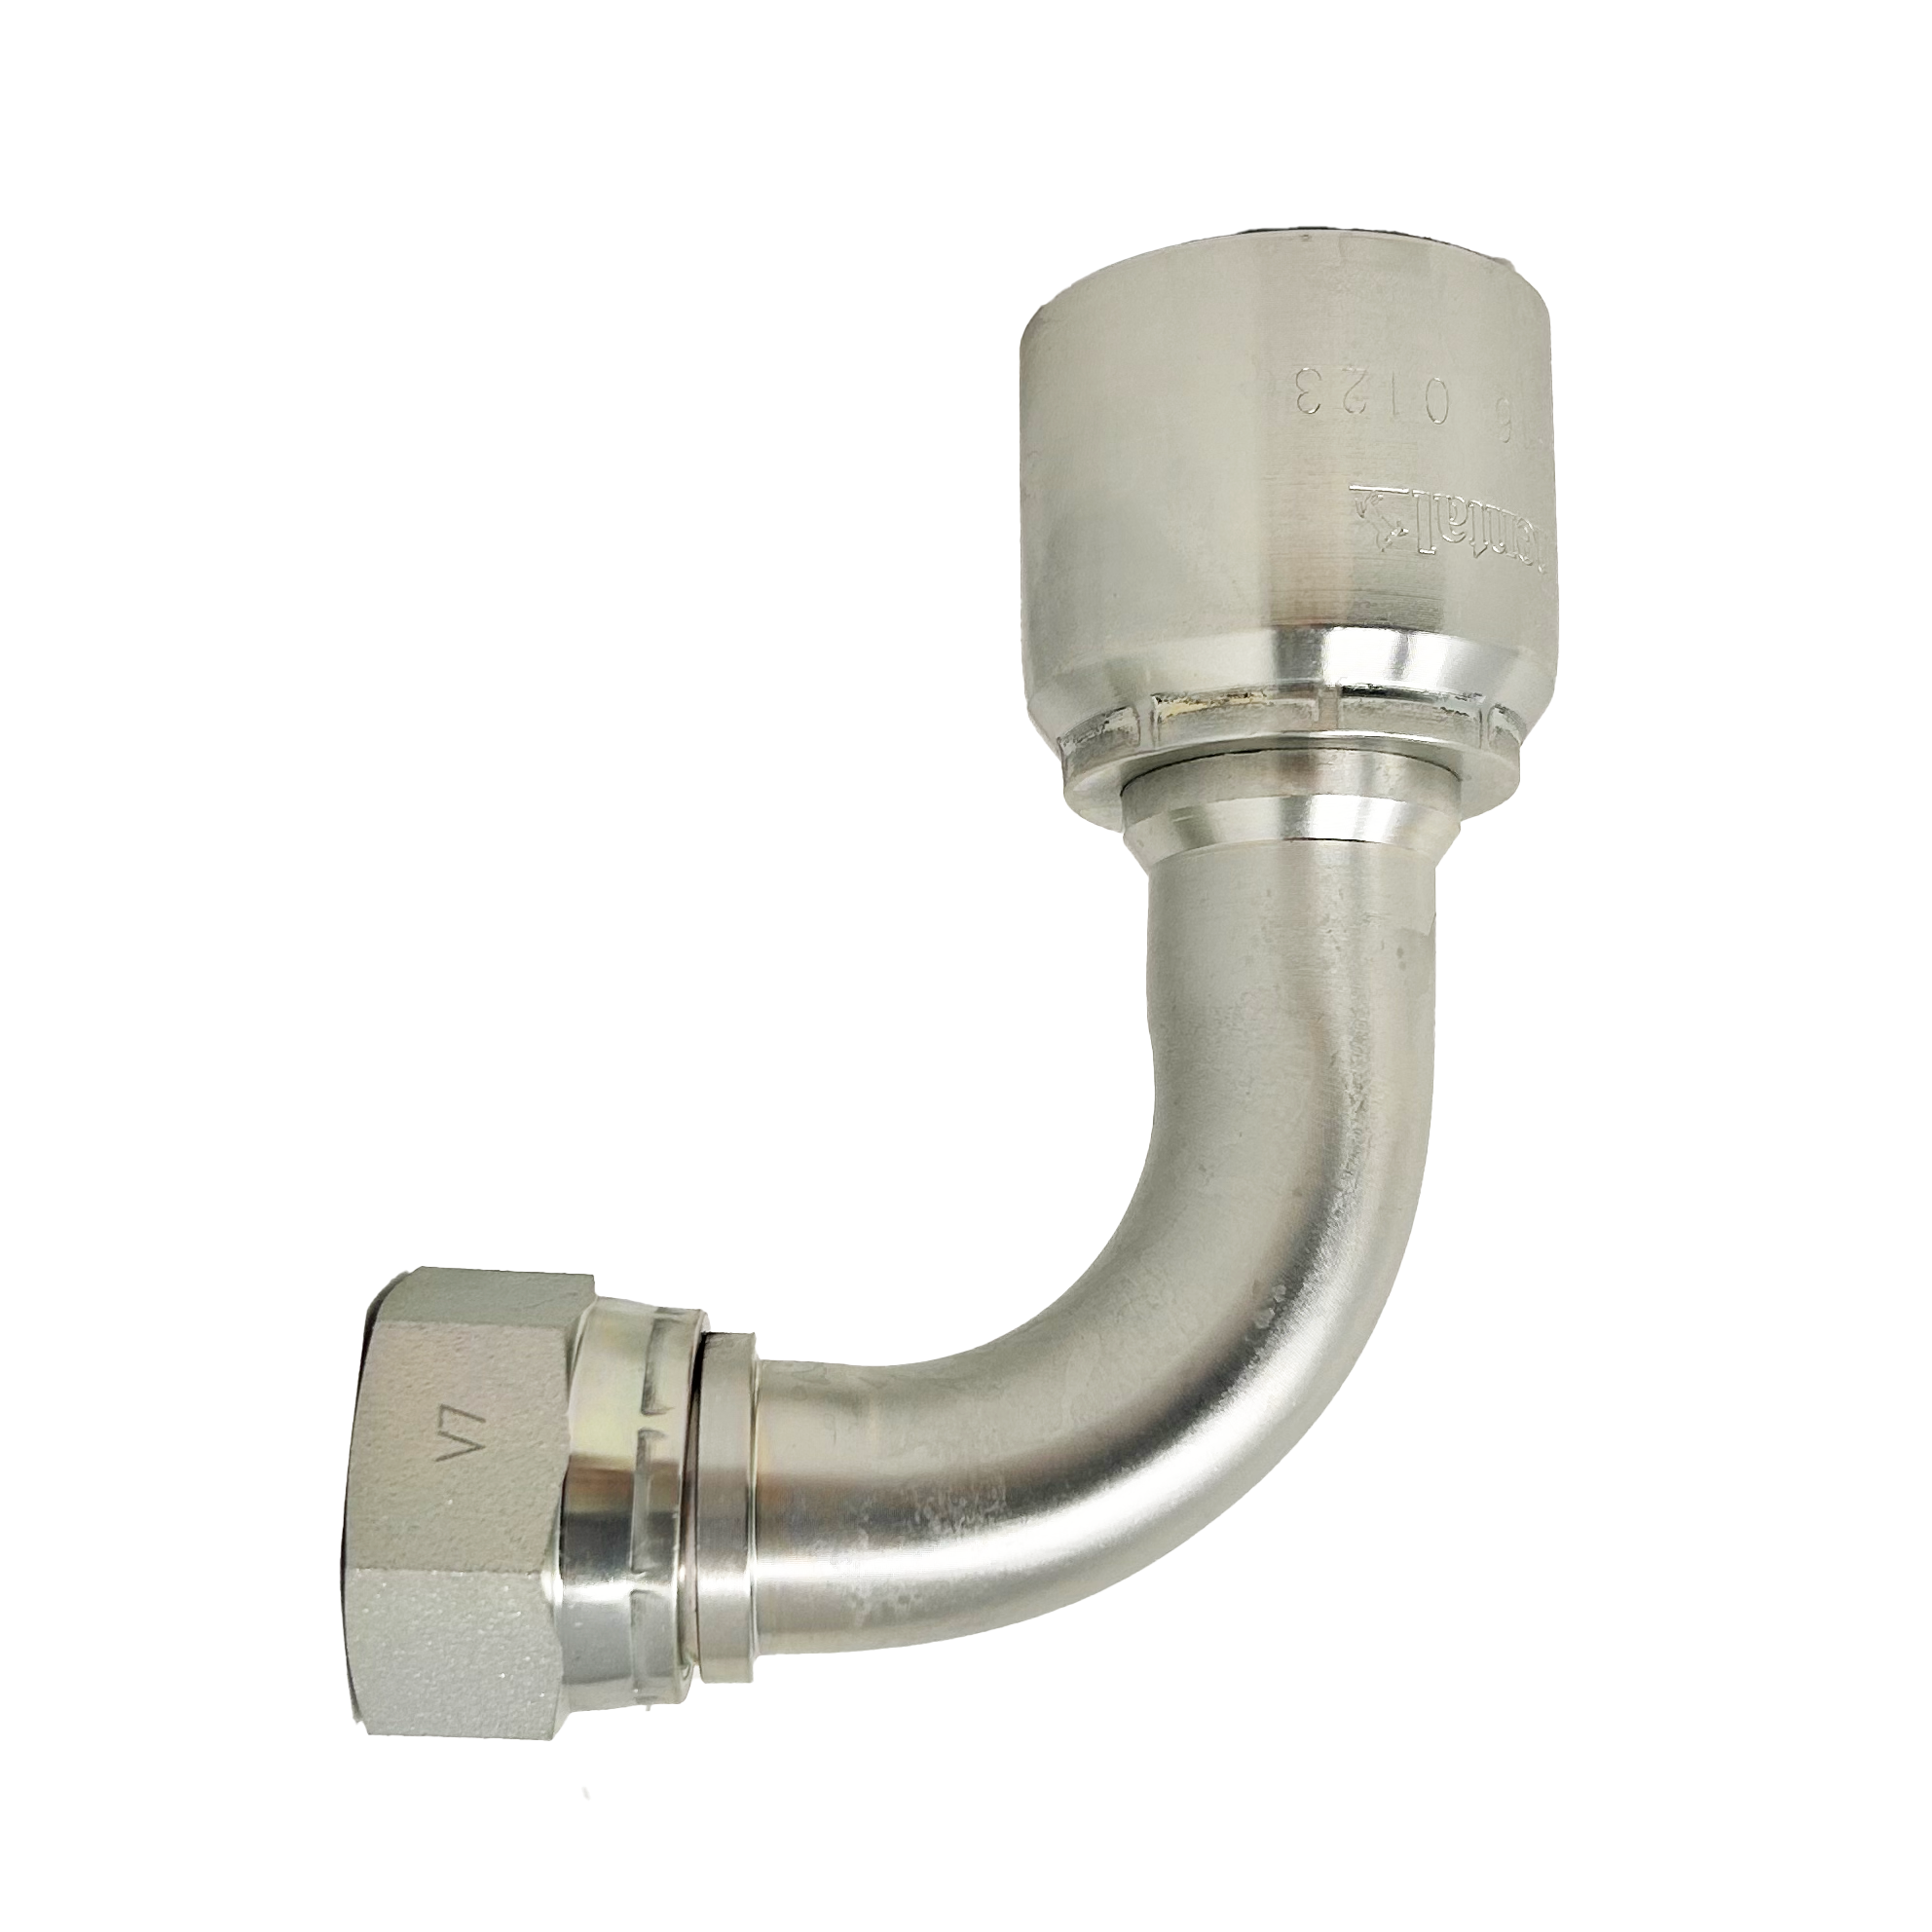 B2-JCFX90-0812: Continental Hose Fitting, 0.5 (1/2") Hose ID x 1-1/16-12 Female JIC, 90-Degree Swivel Connection